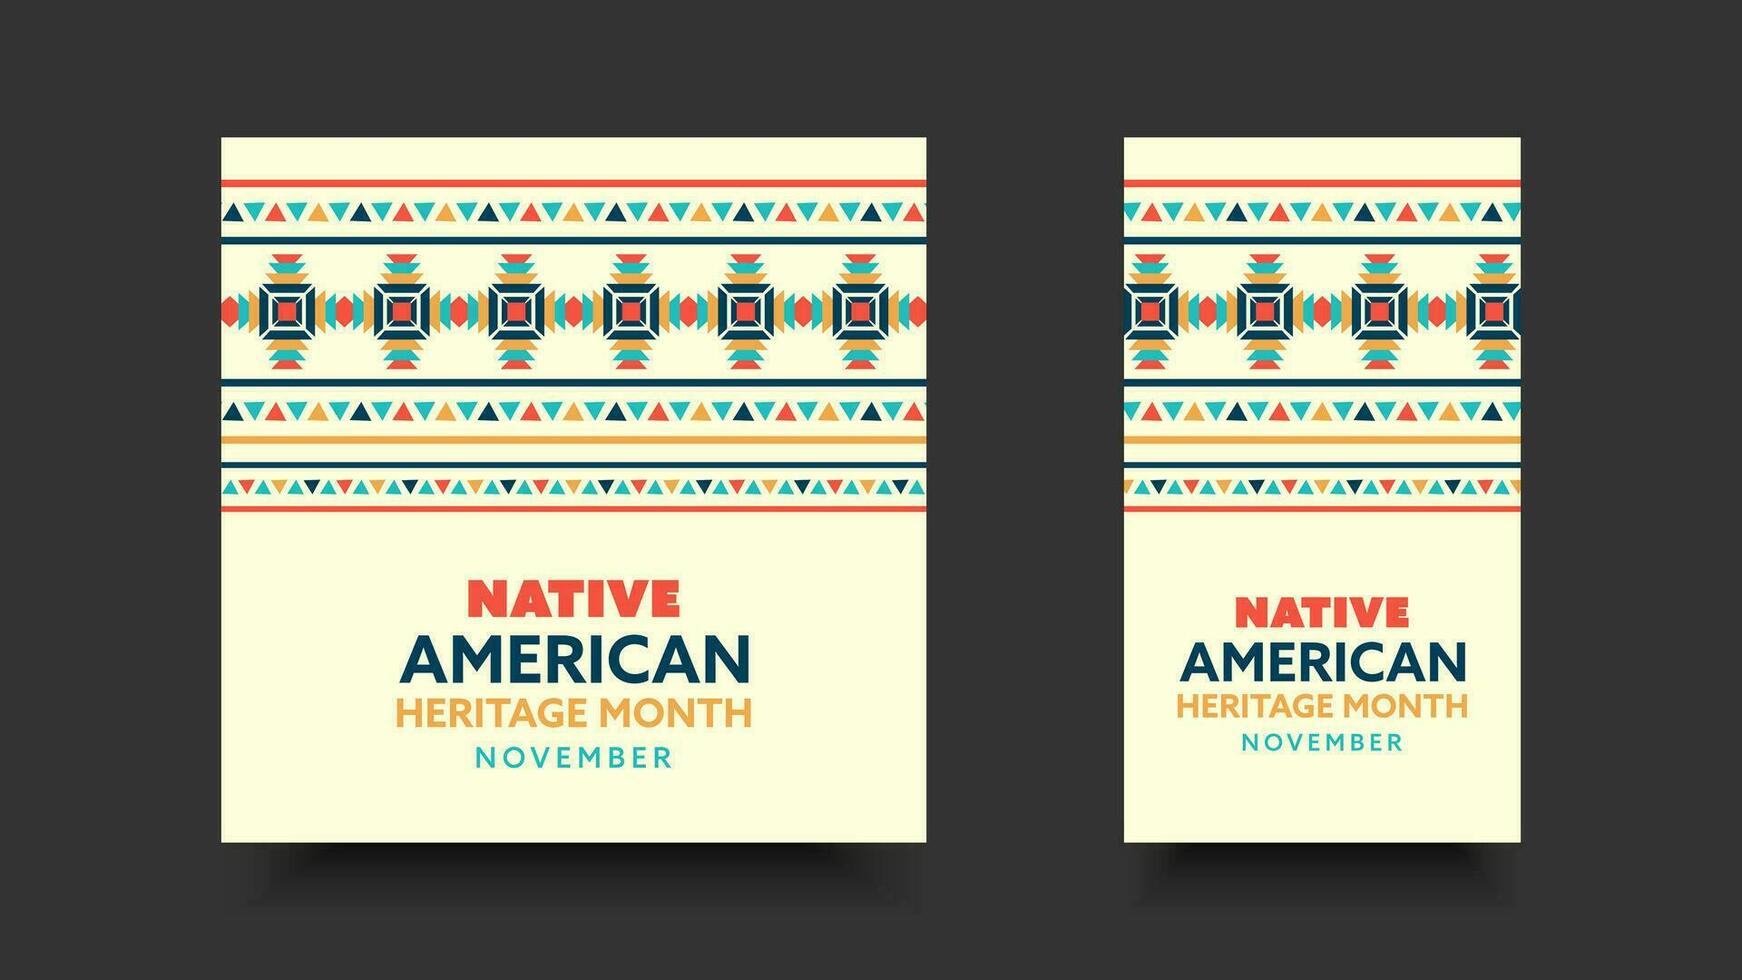 Native American Heritage Month. pattern design for greetings, backgrounds, banners, posters. vector